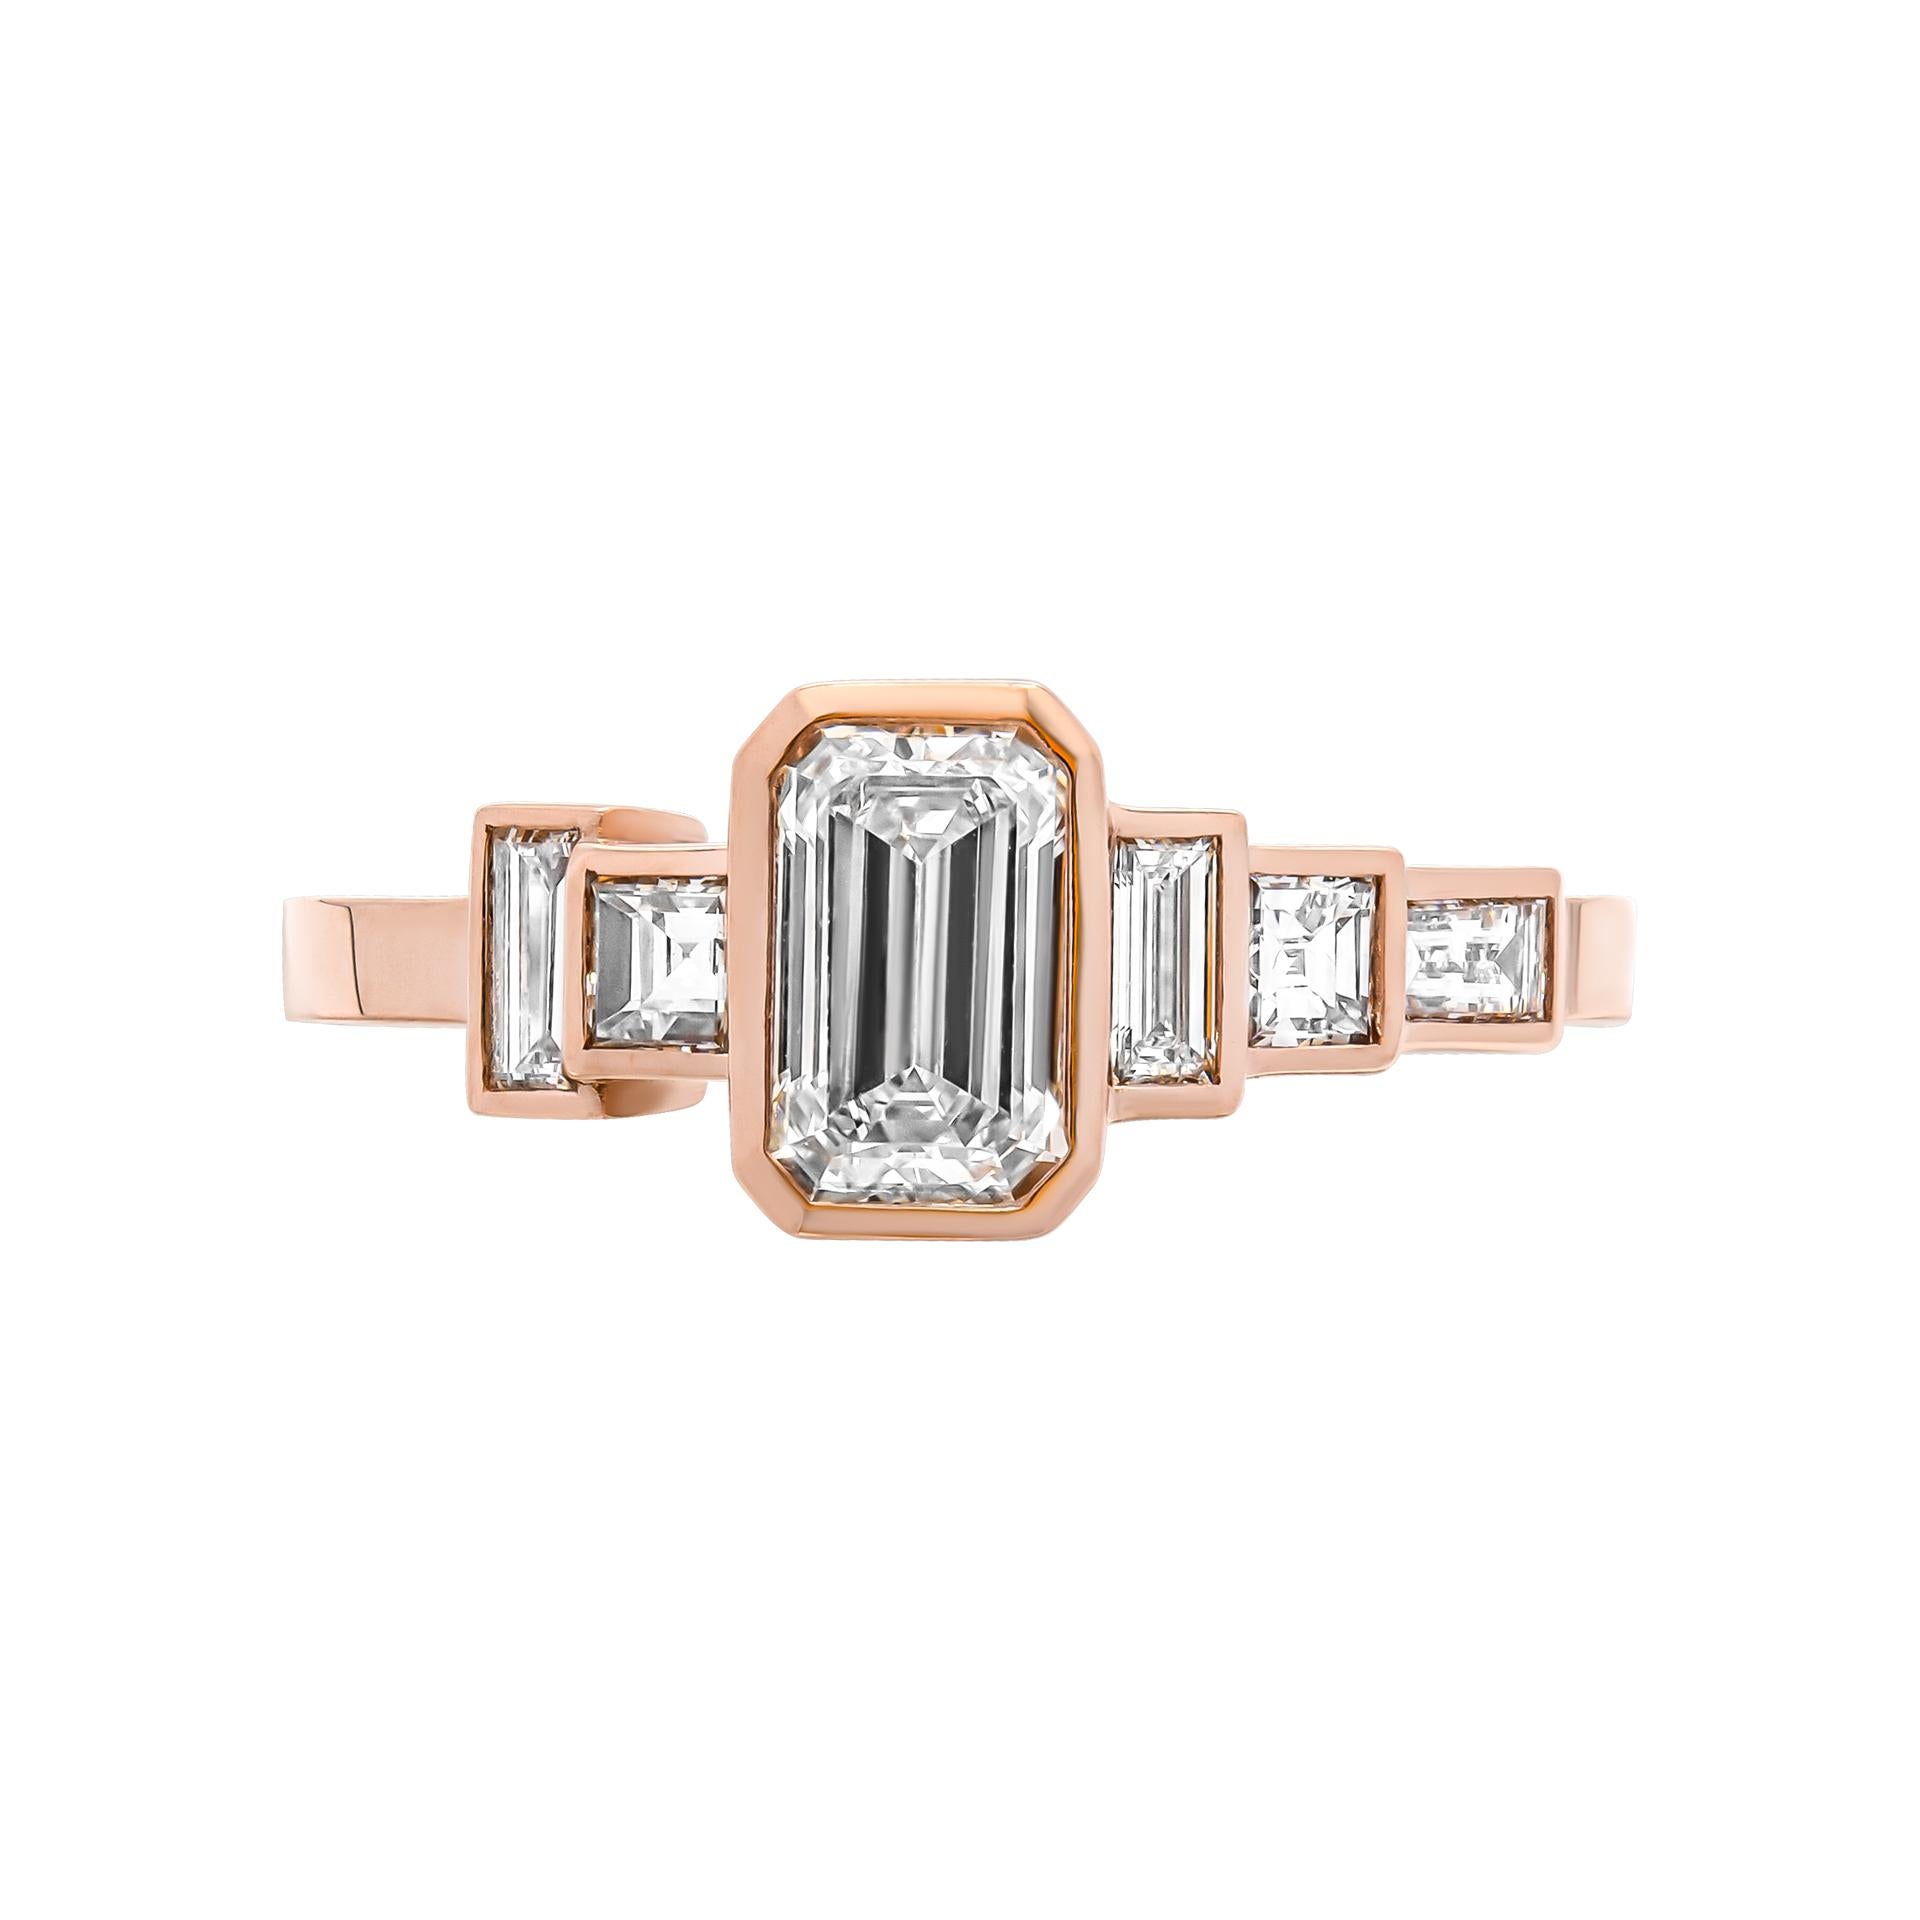 With plain shank & bezel halo with 0.80 Carat Emerald Cut Diamond Ring in 18K Rose Gold 
2 stones baguette cut diamonds 0.10ct each 3 stones princess cut diamonds 0.19ct each 
Size: 5